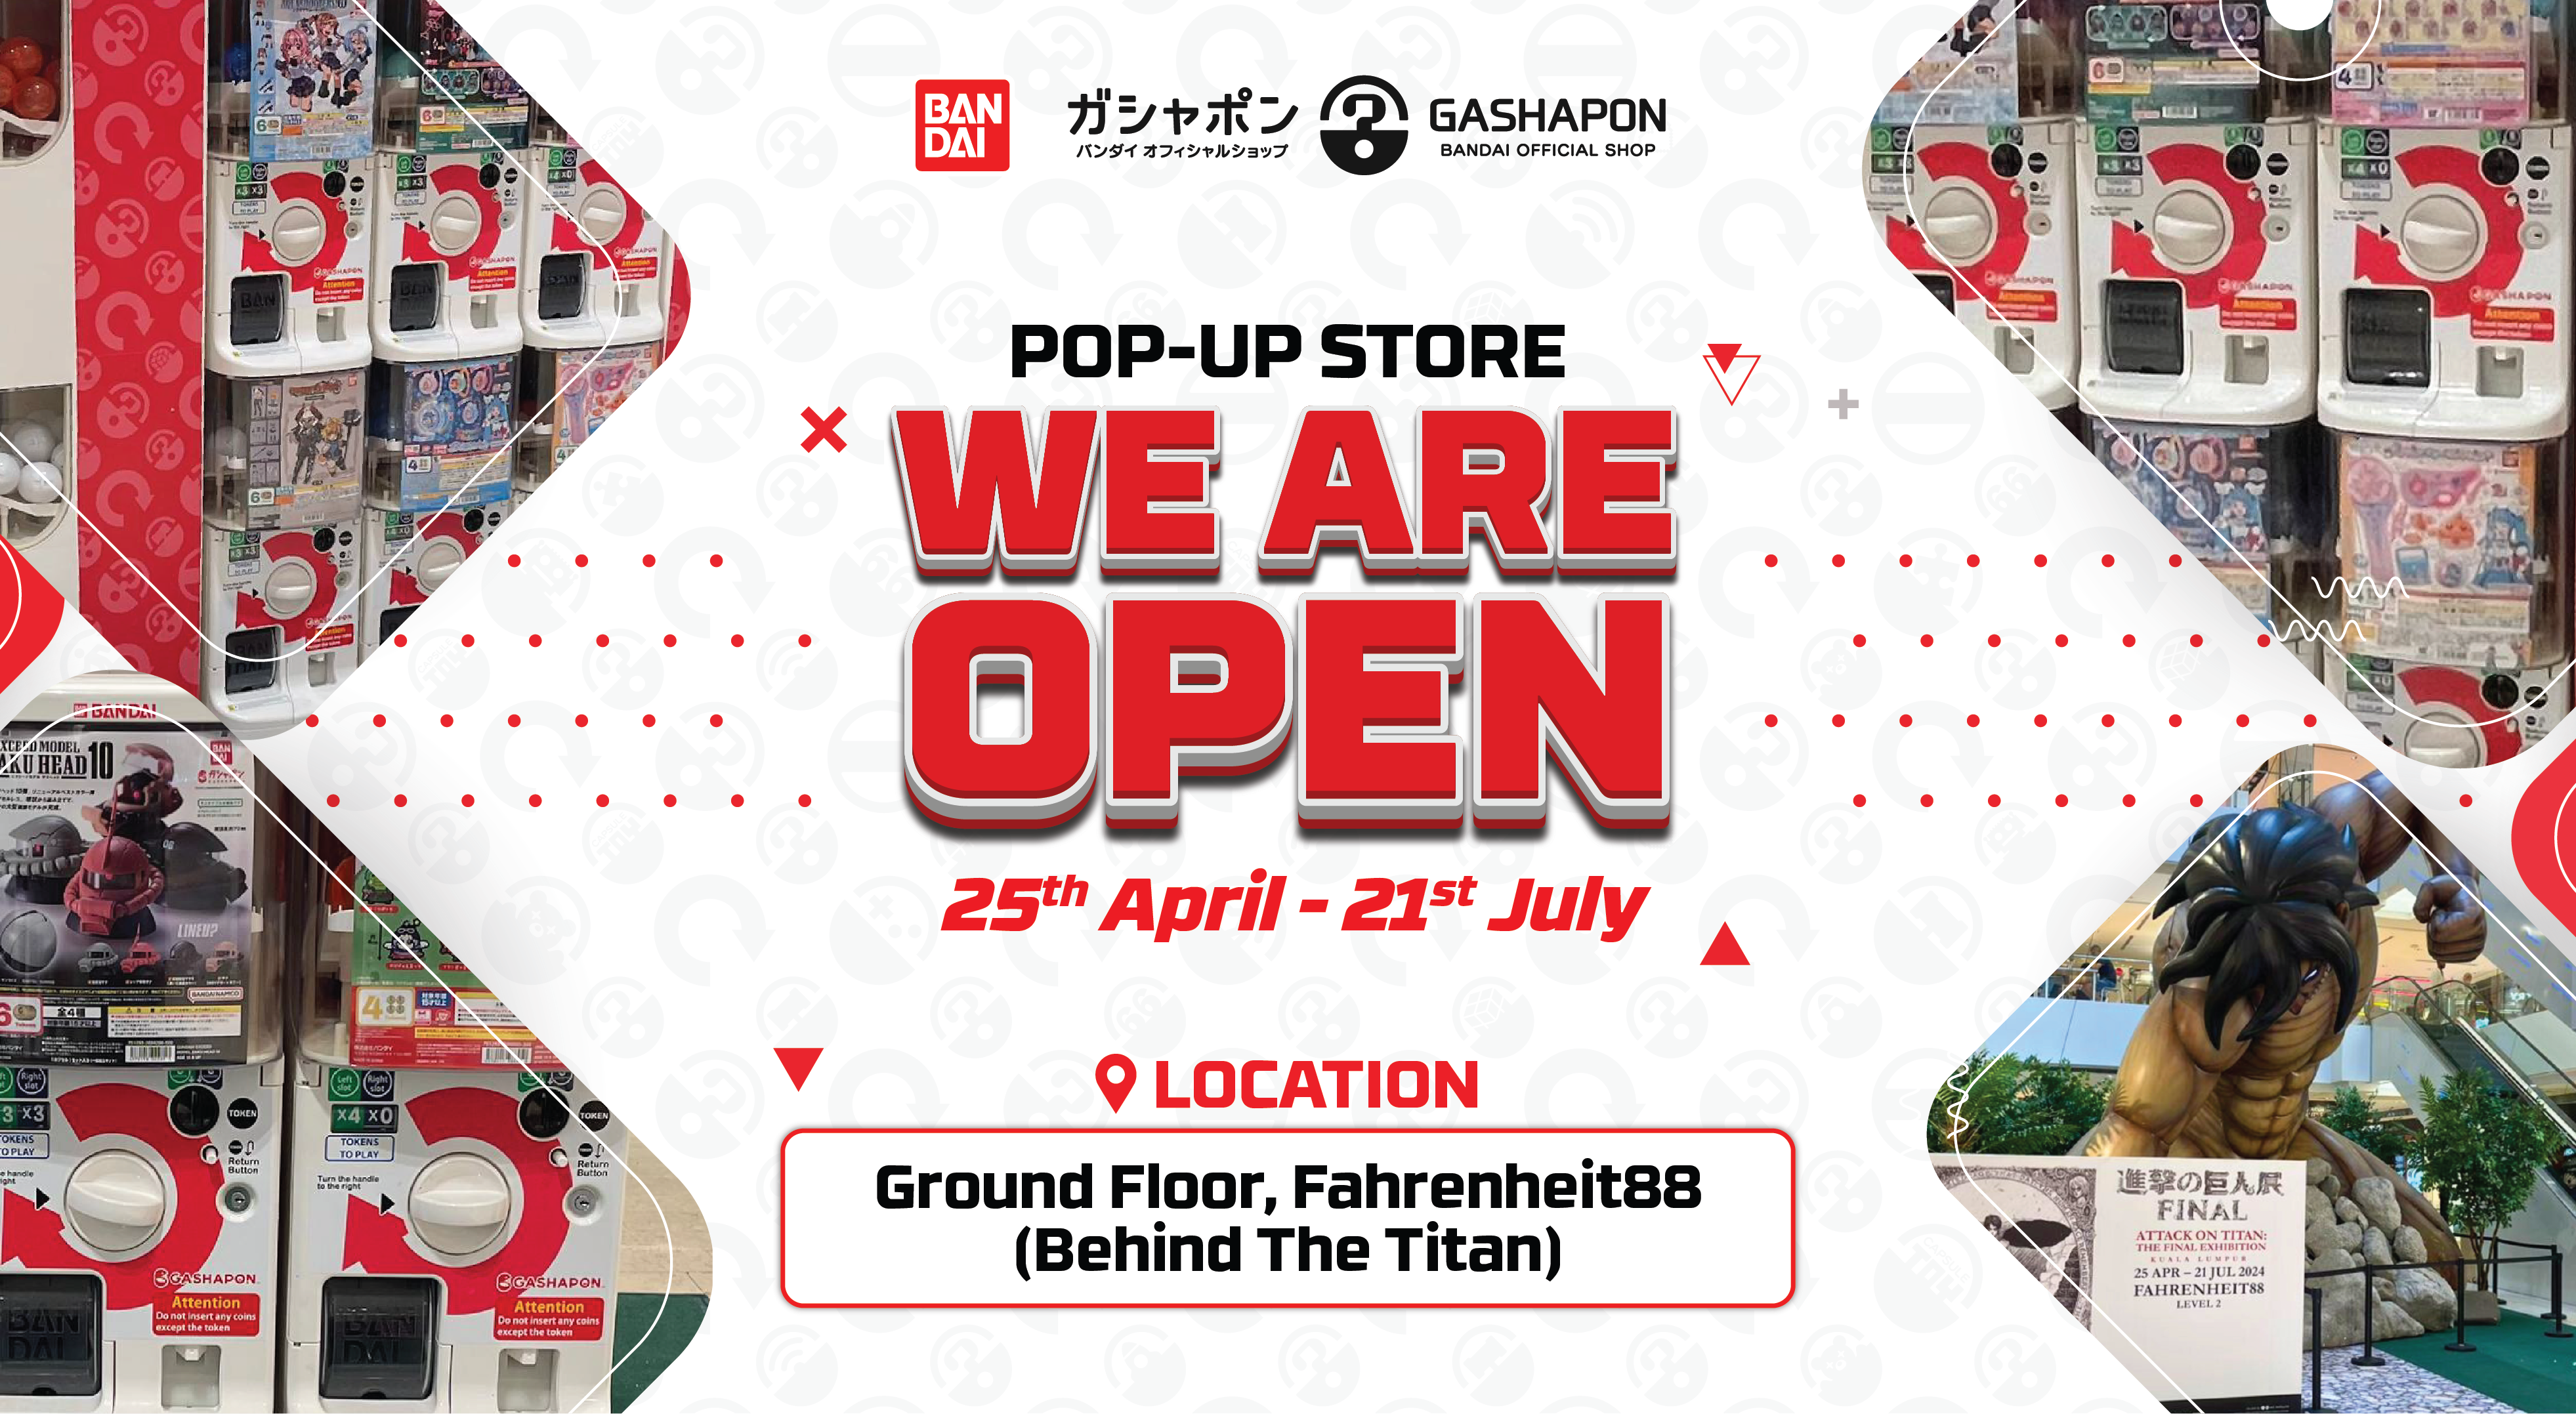 NEW Gashapon Bandai Official Pop-up Store at Fahrenheit88